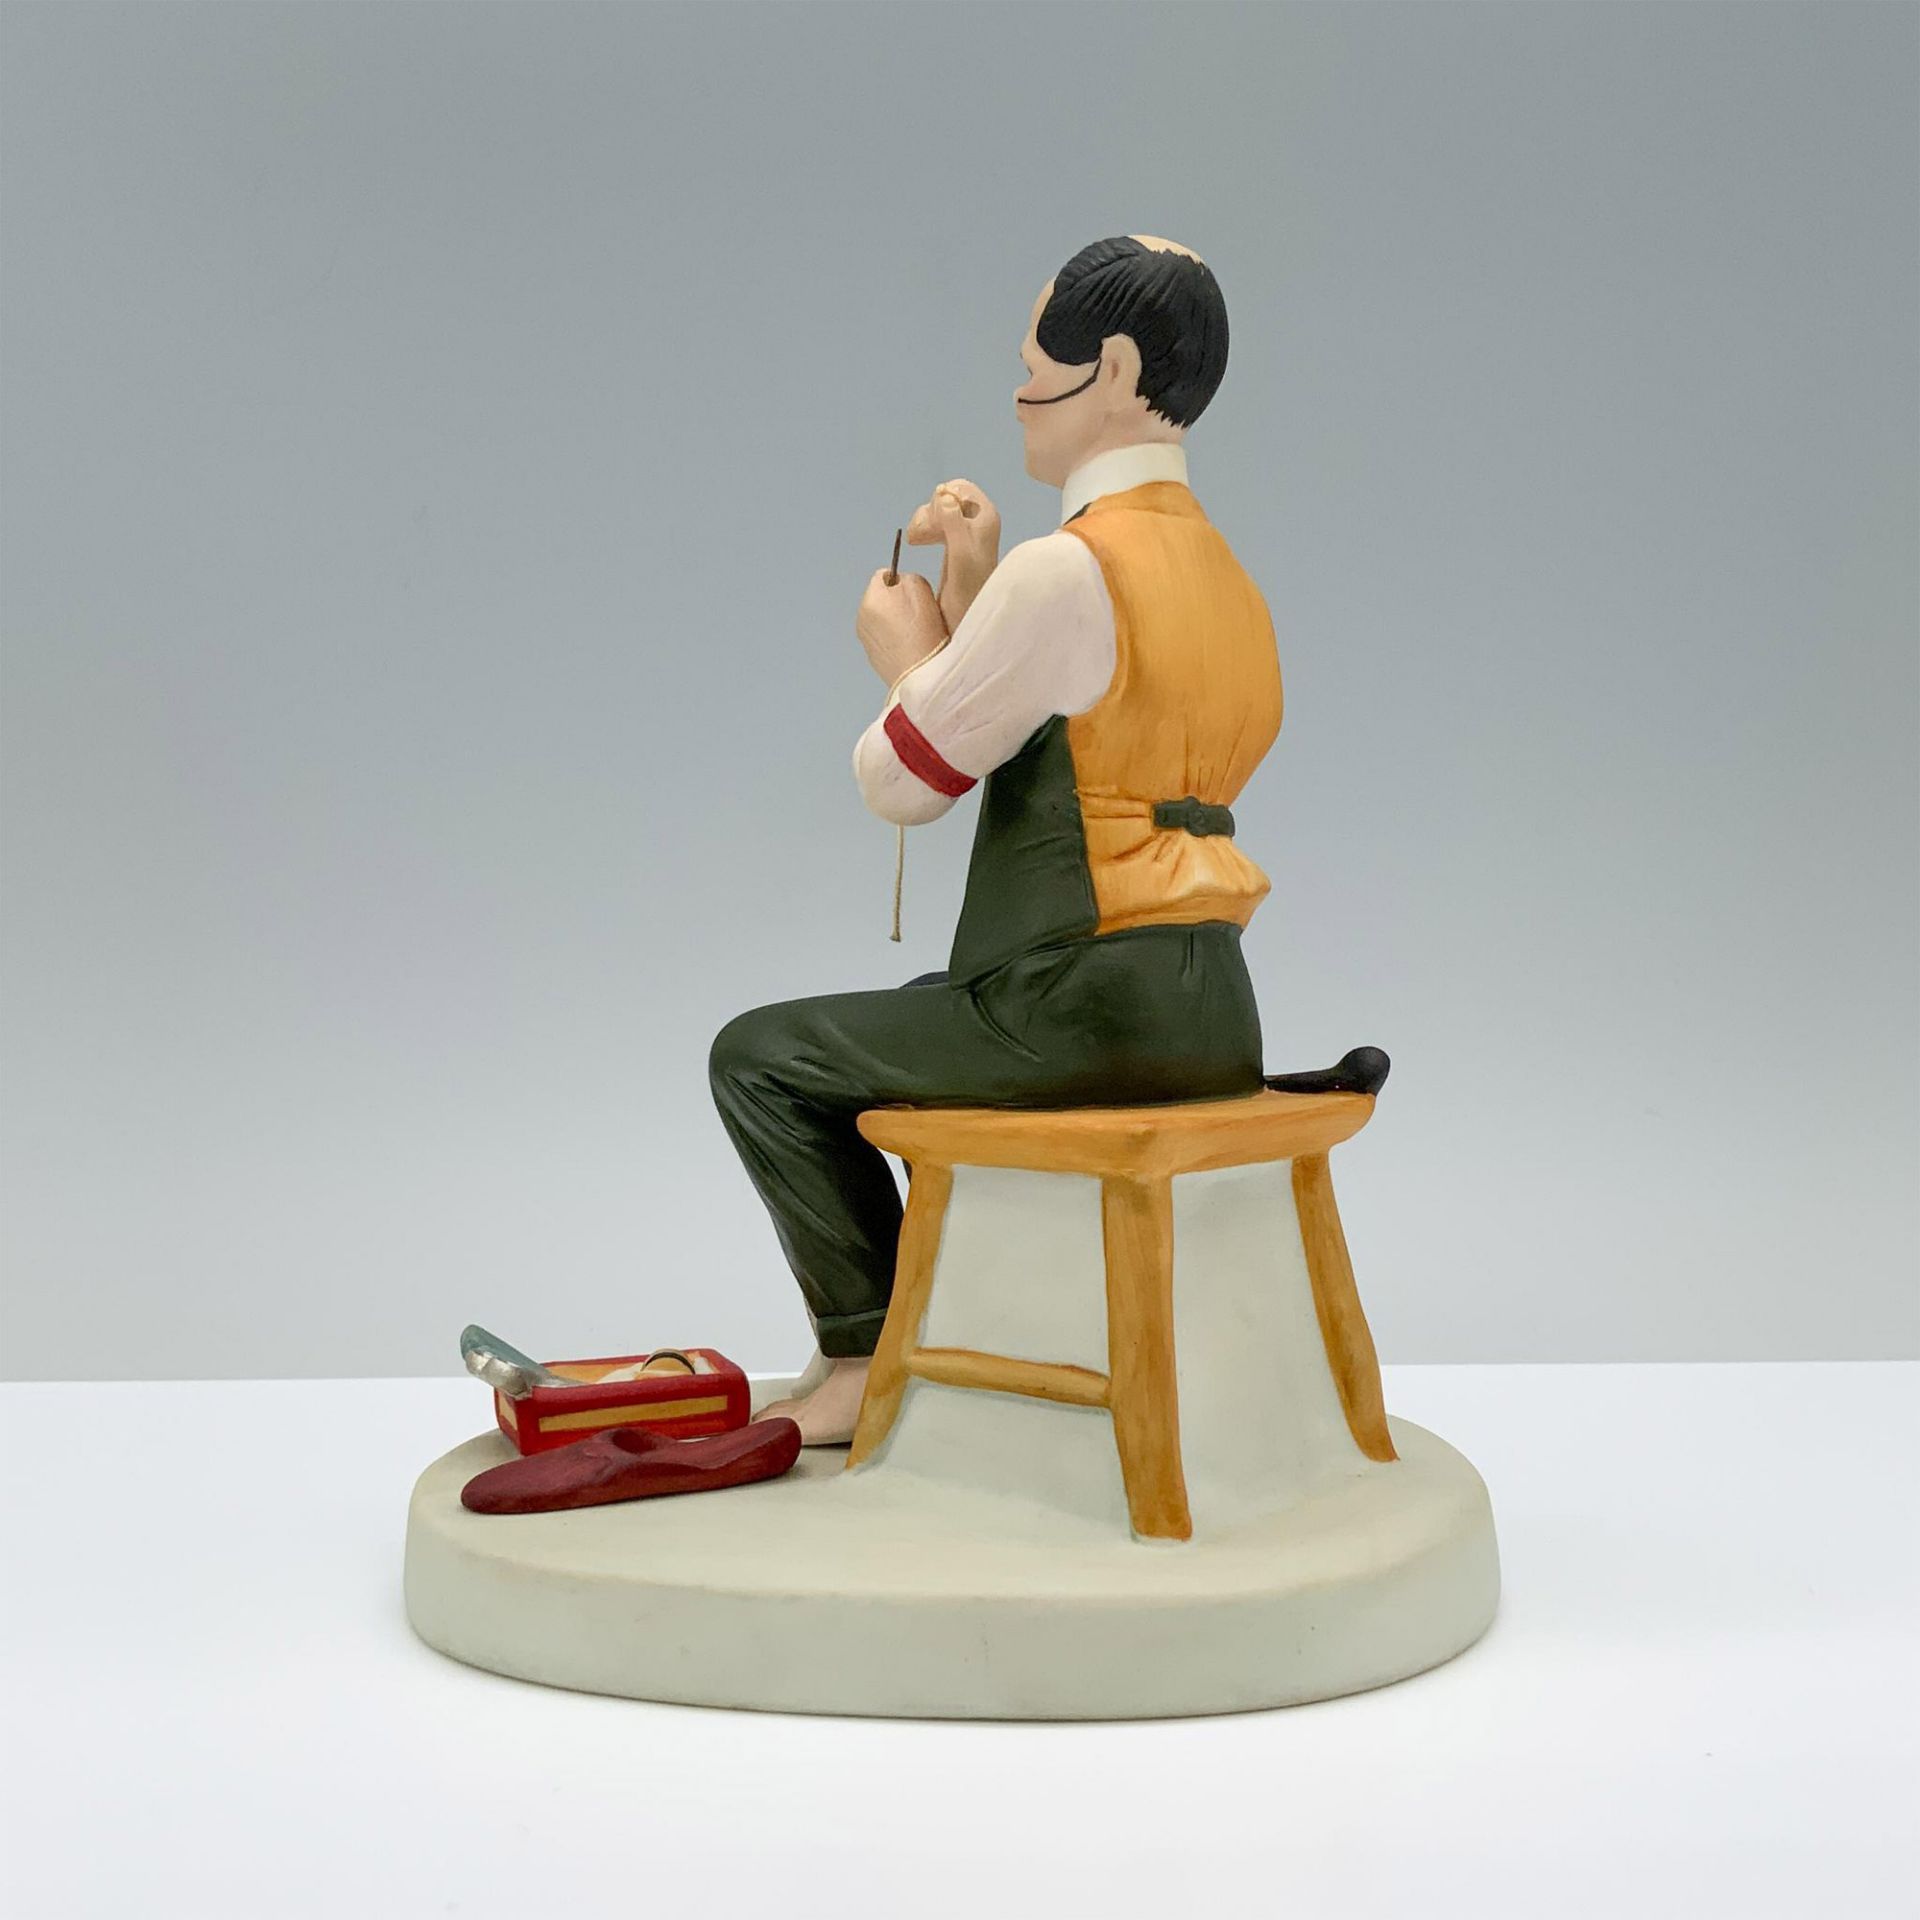 Norman Rockwell Figurine, Man Threading a Needle - Image 2 of 3